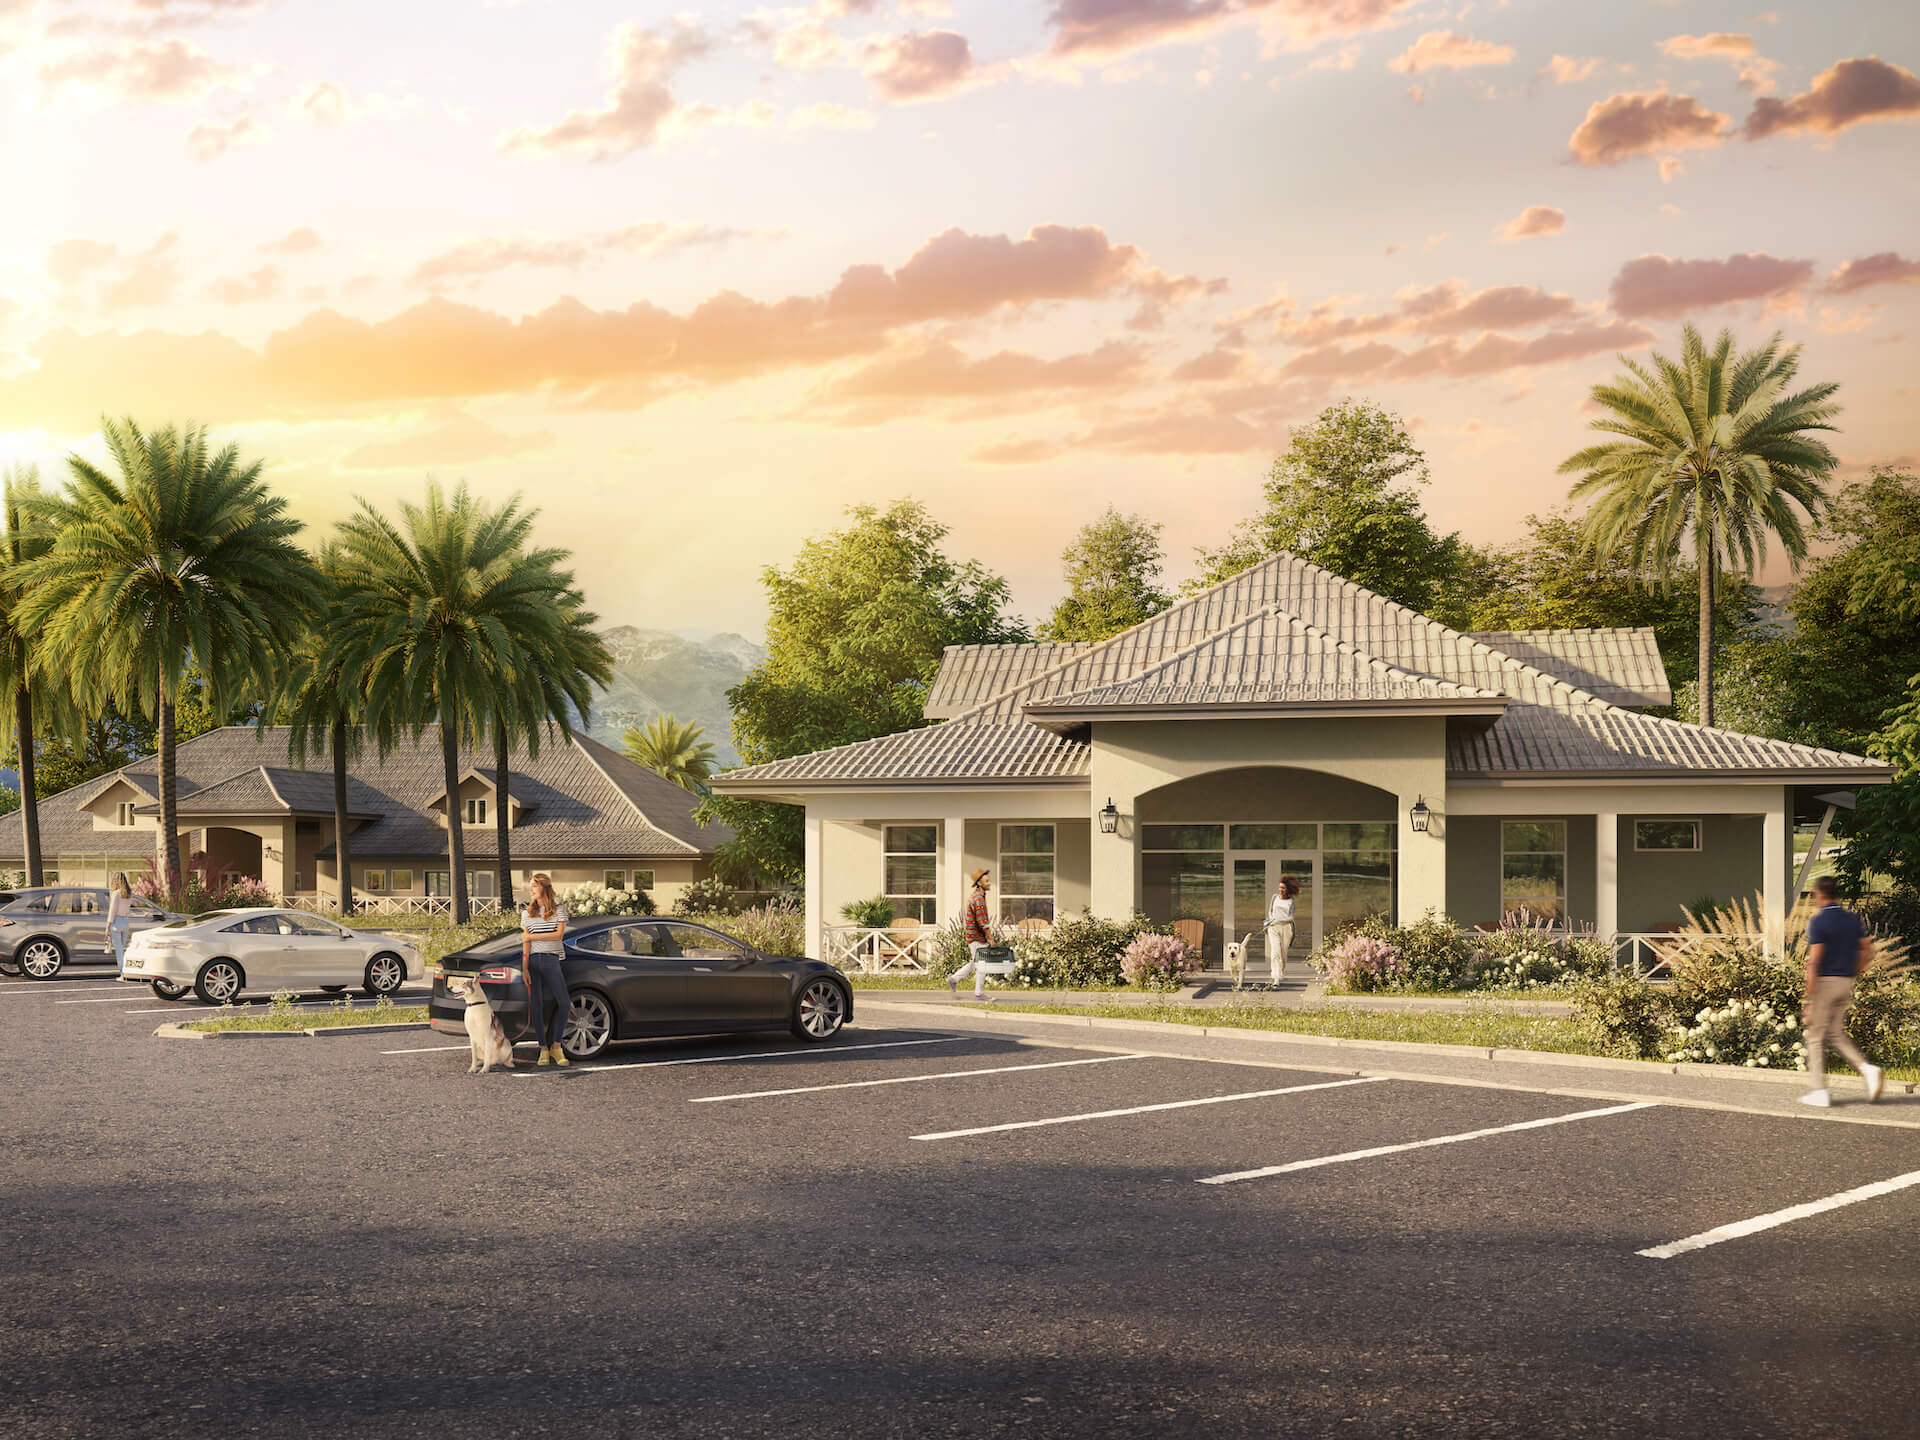 3D Building Rendering for a Veterenary Clinic in Hawaii